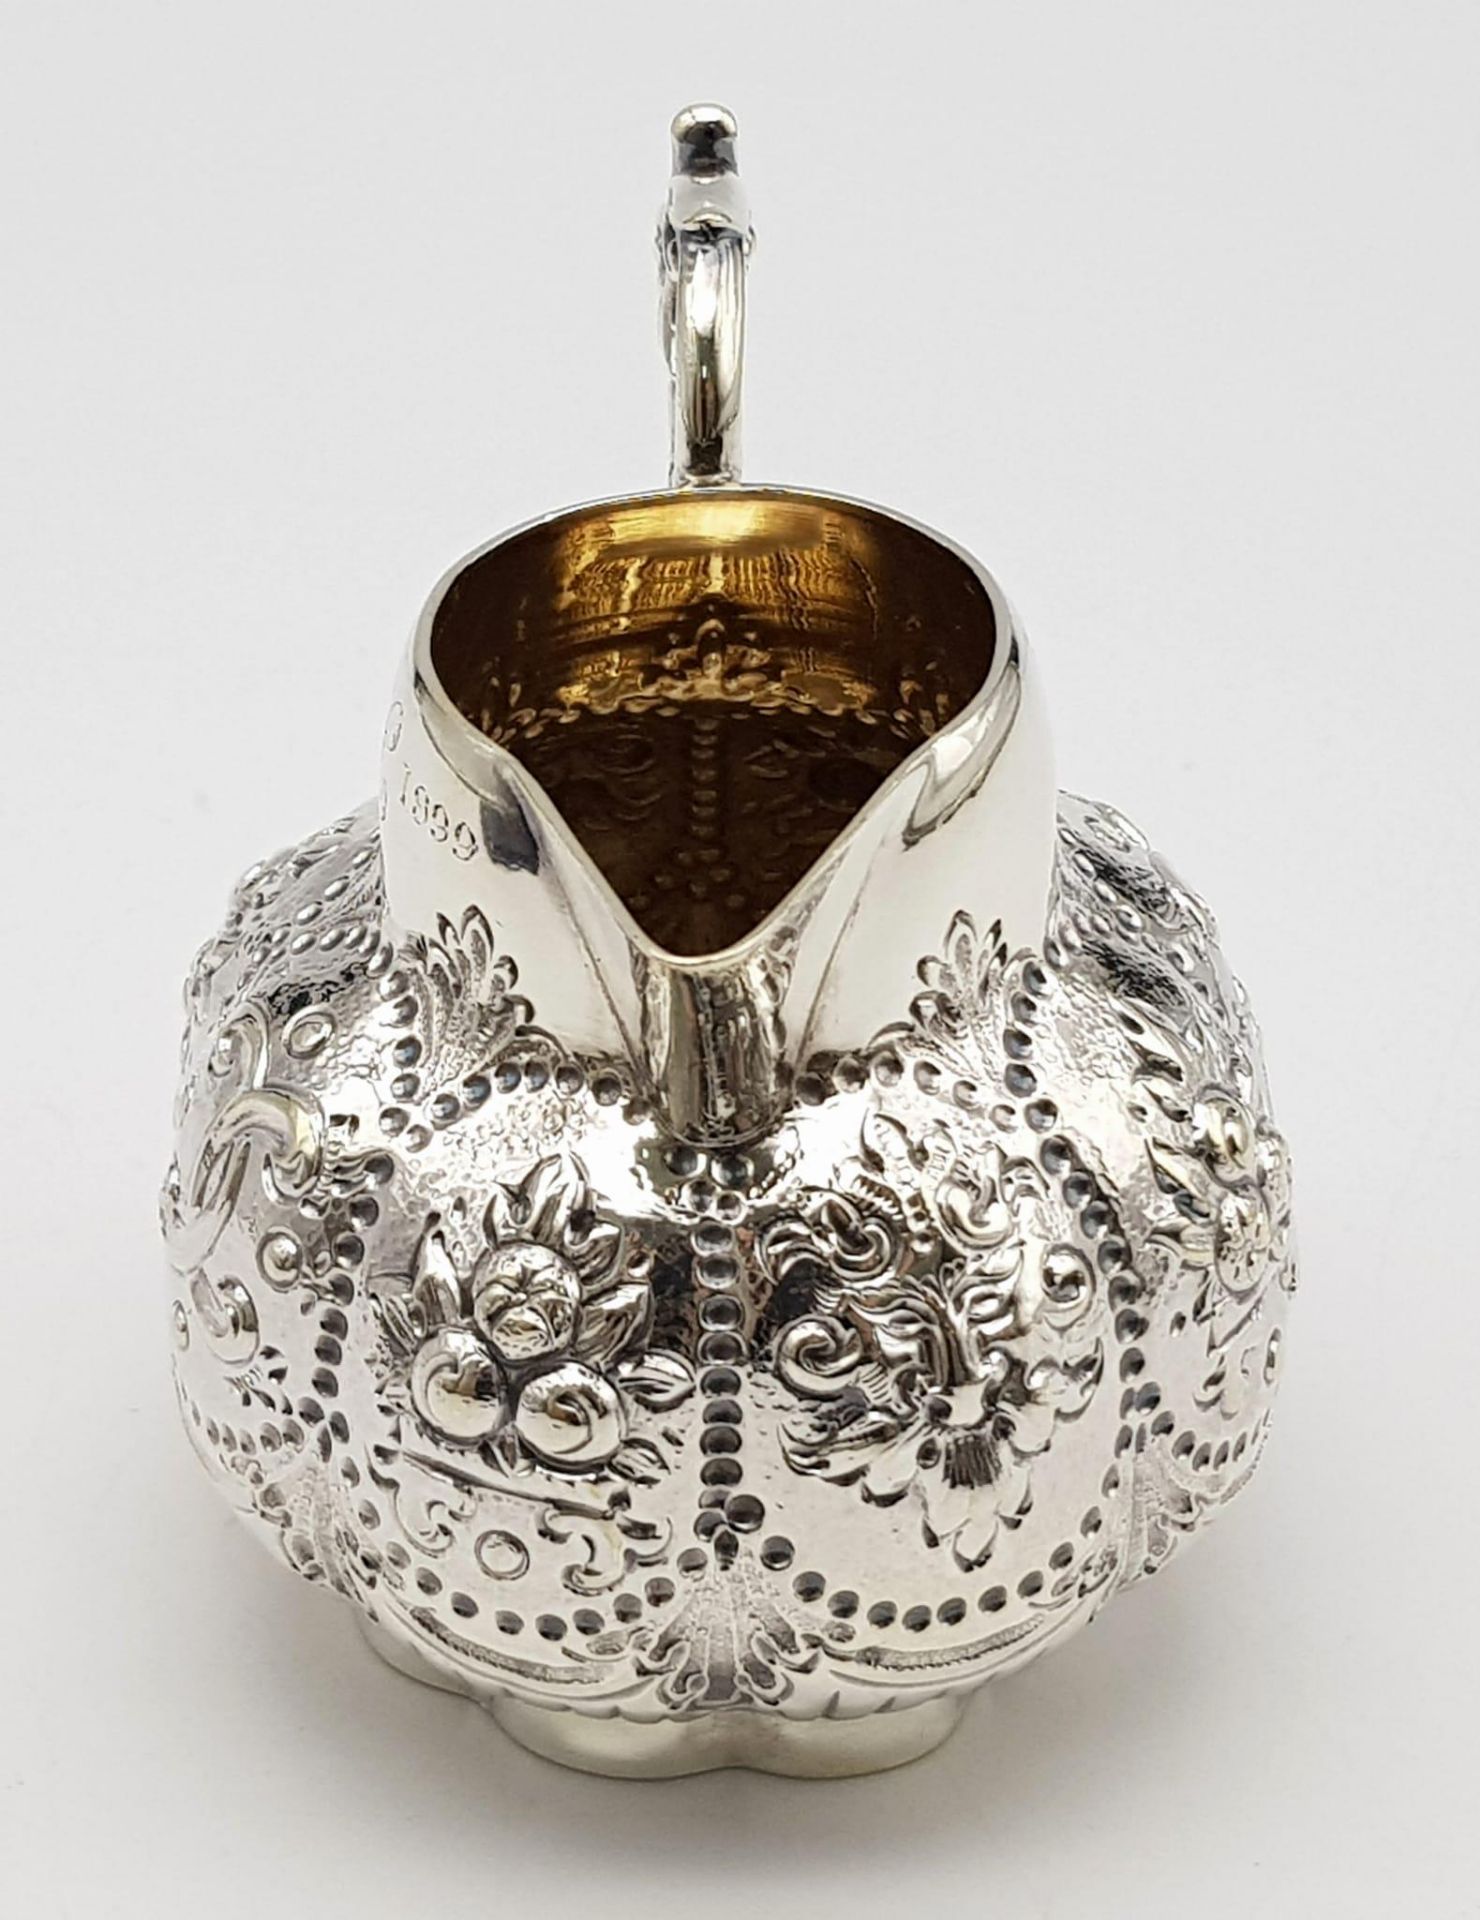 A SMALL SOLID SILVER JUG WITH THE INSCRIPTION "XMAS 1899" ALTHOUGH THE HALLMARK IS DATED 1891 WITH - Image 3 of 9